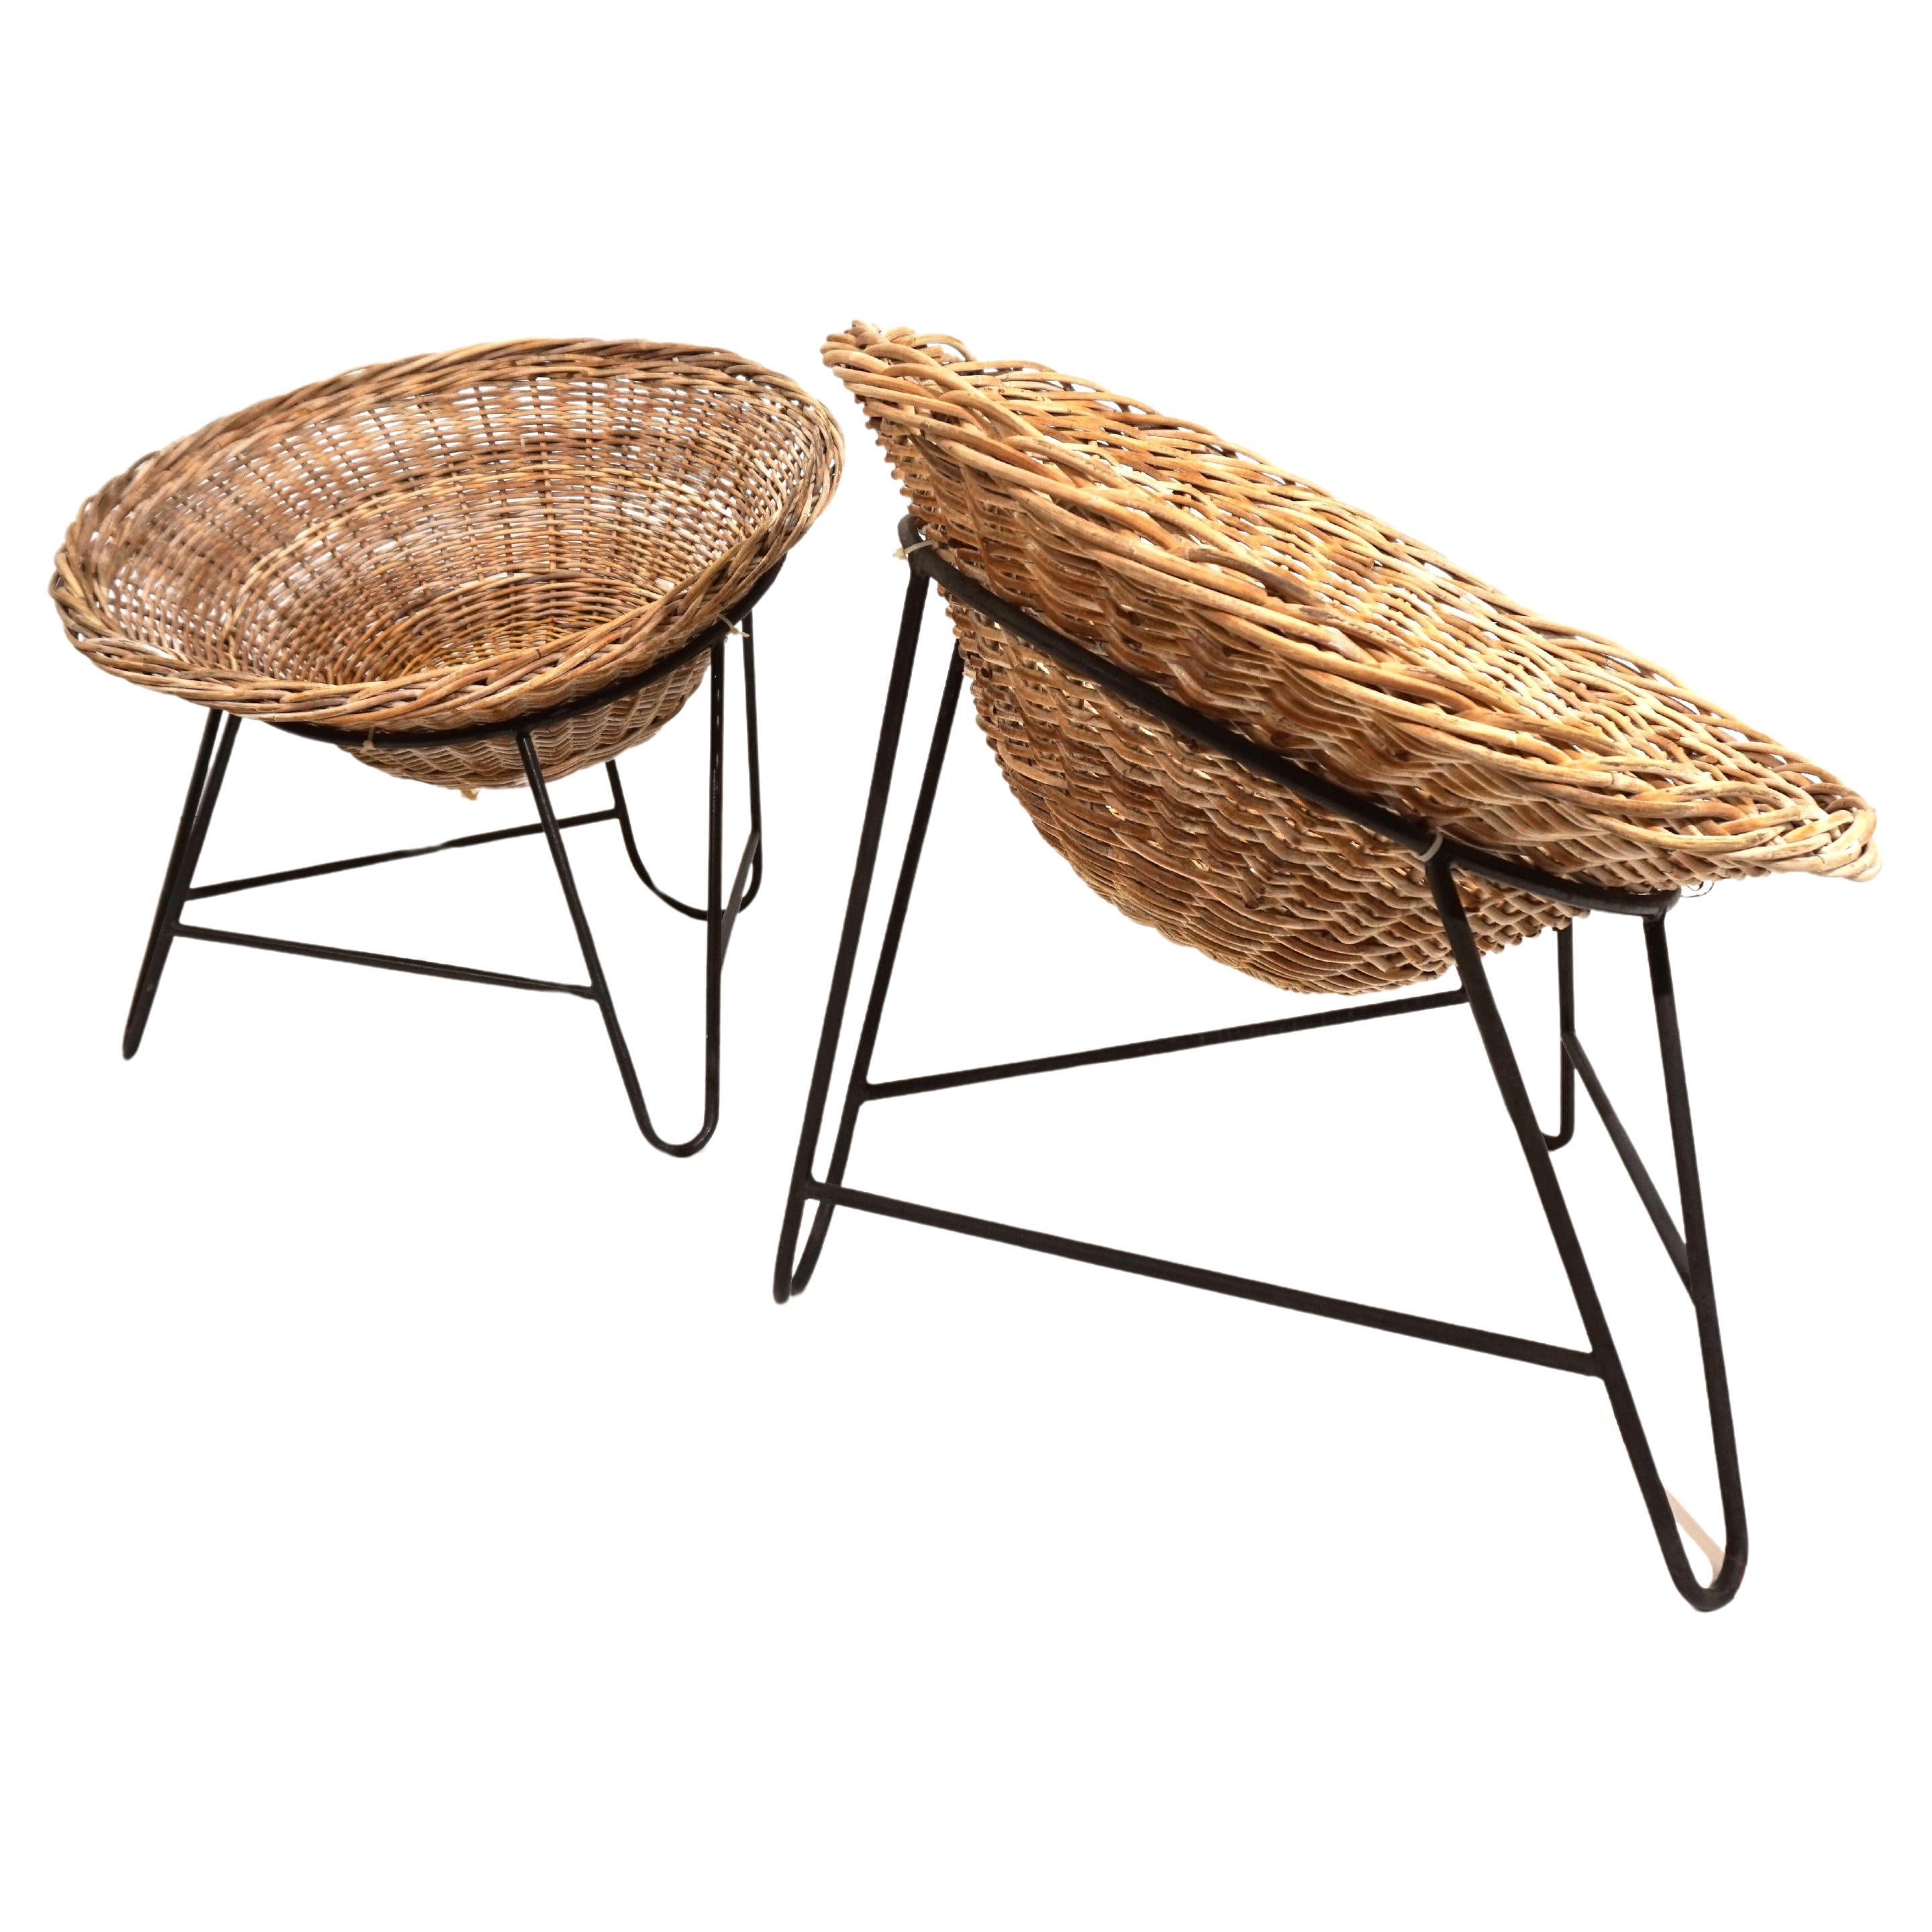 Set of 2 wicker pod chairs from the 60s